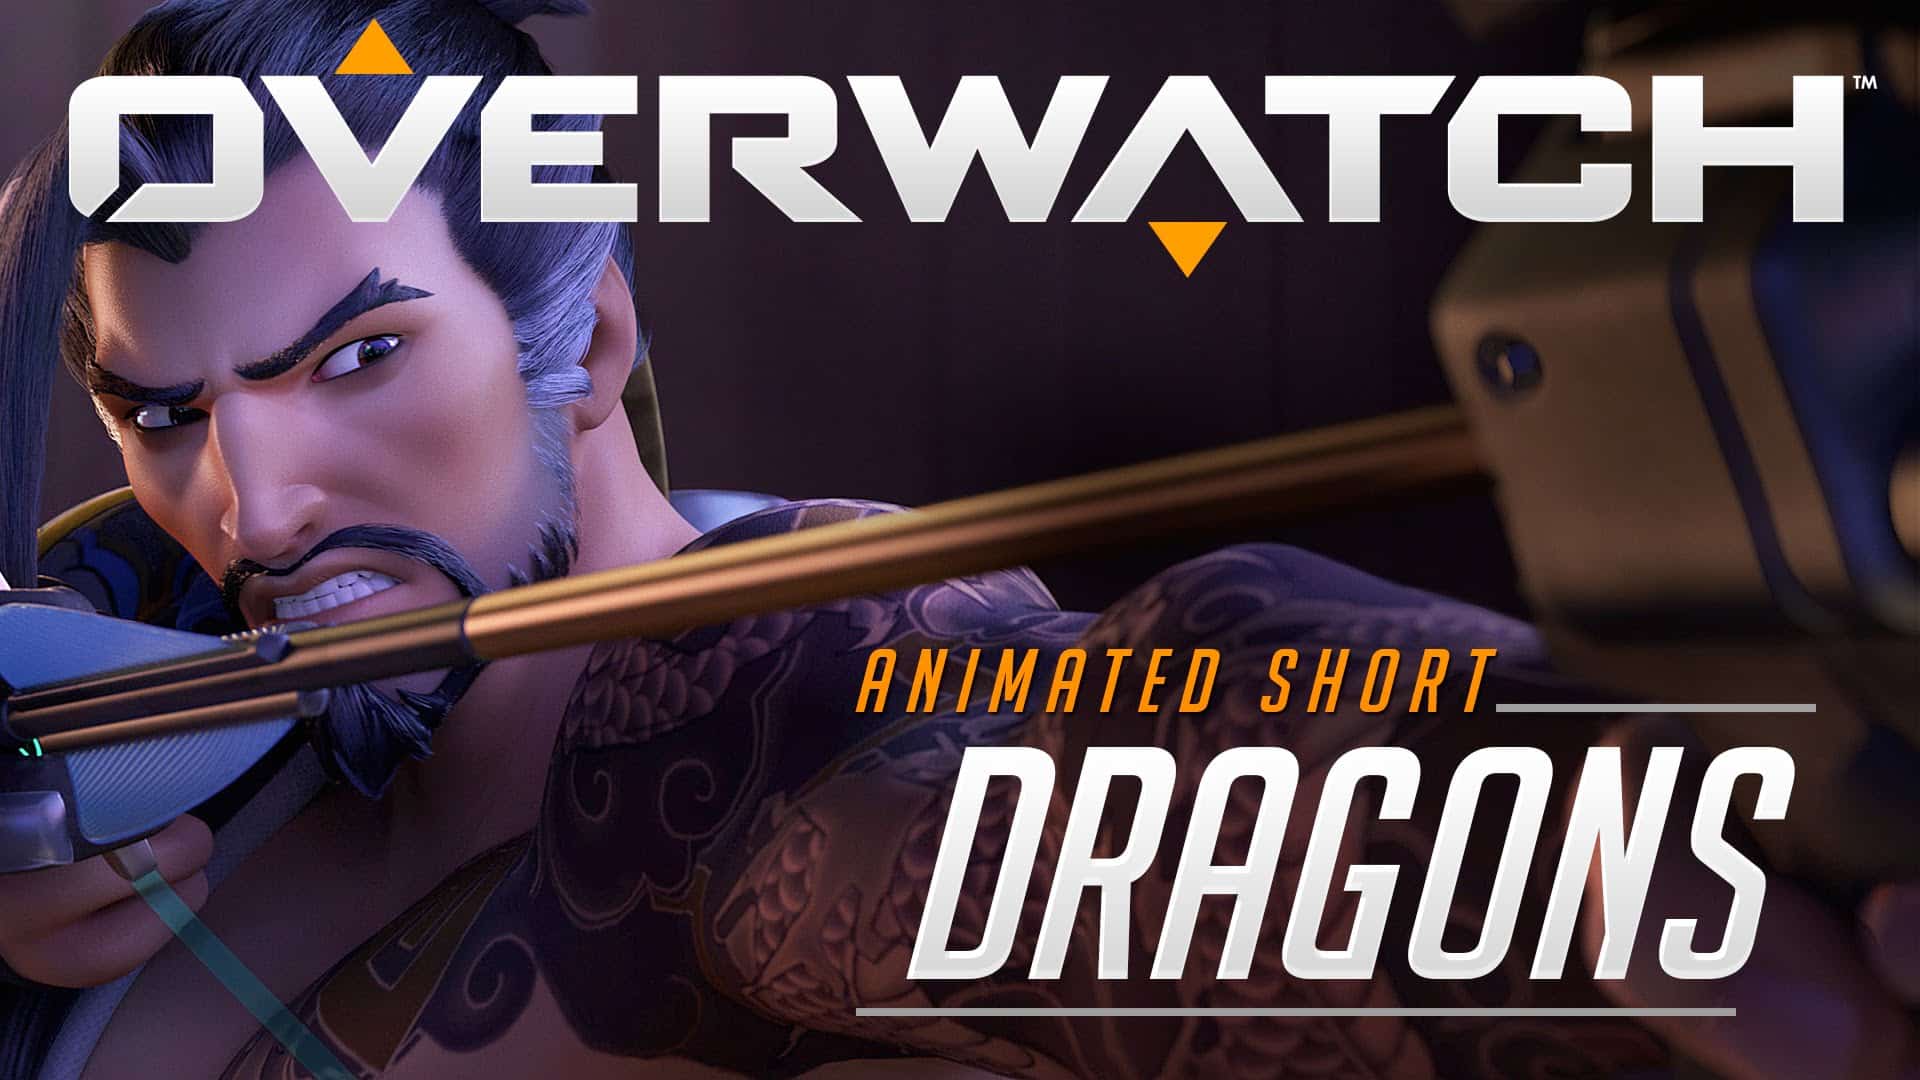 Overwatch 'Dragons' Animated Short